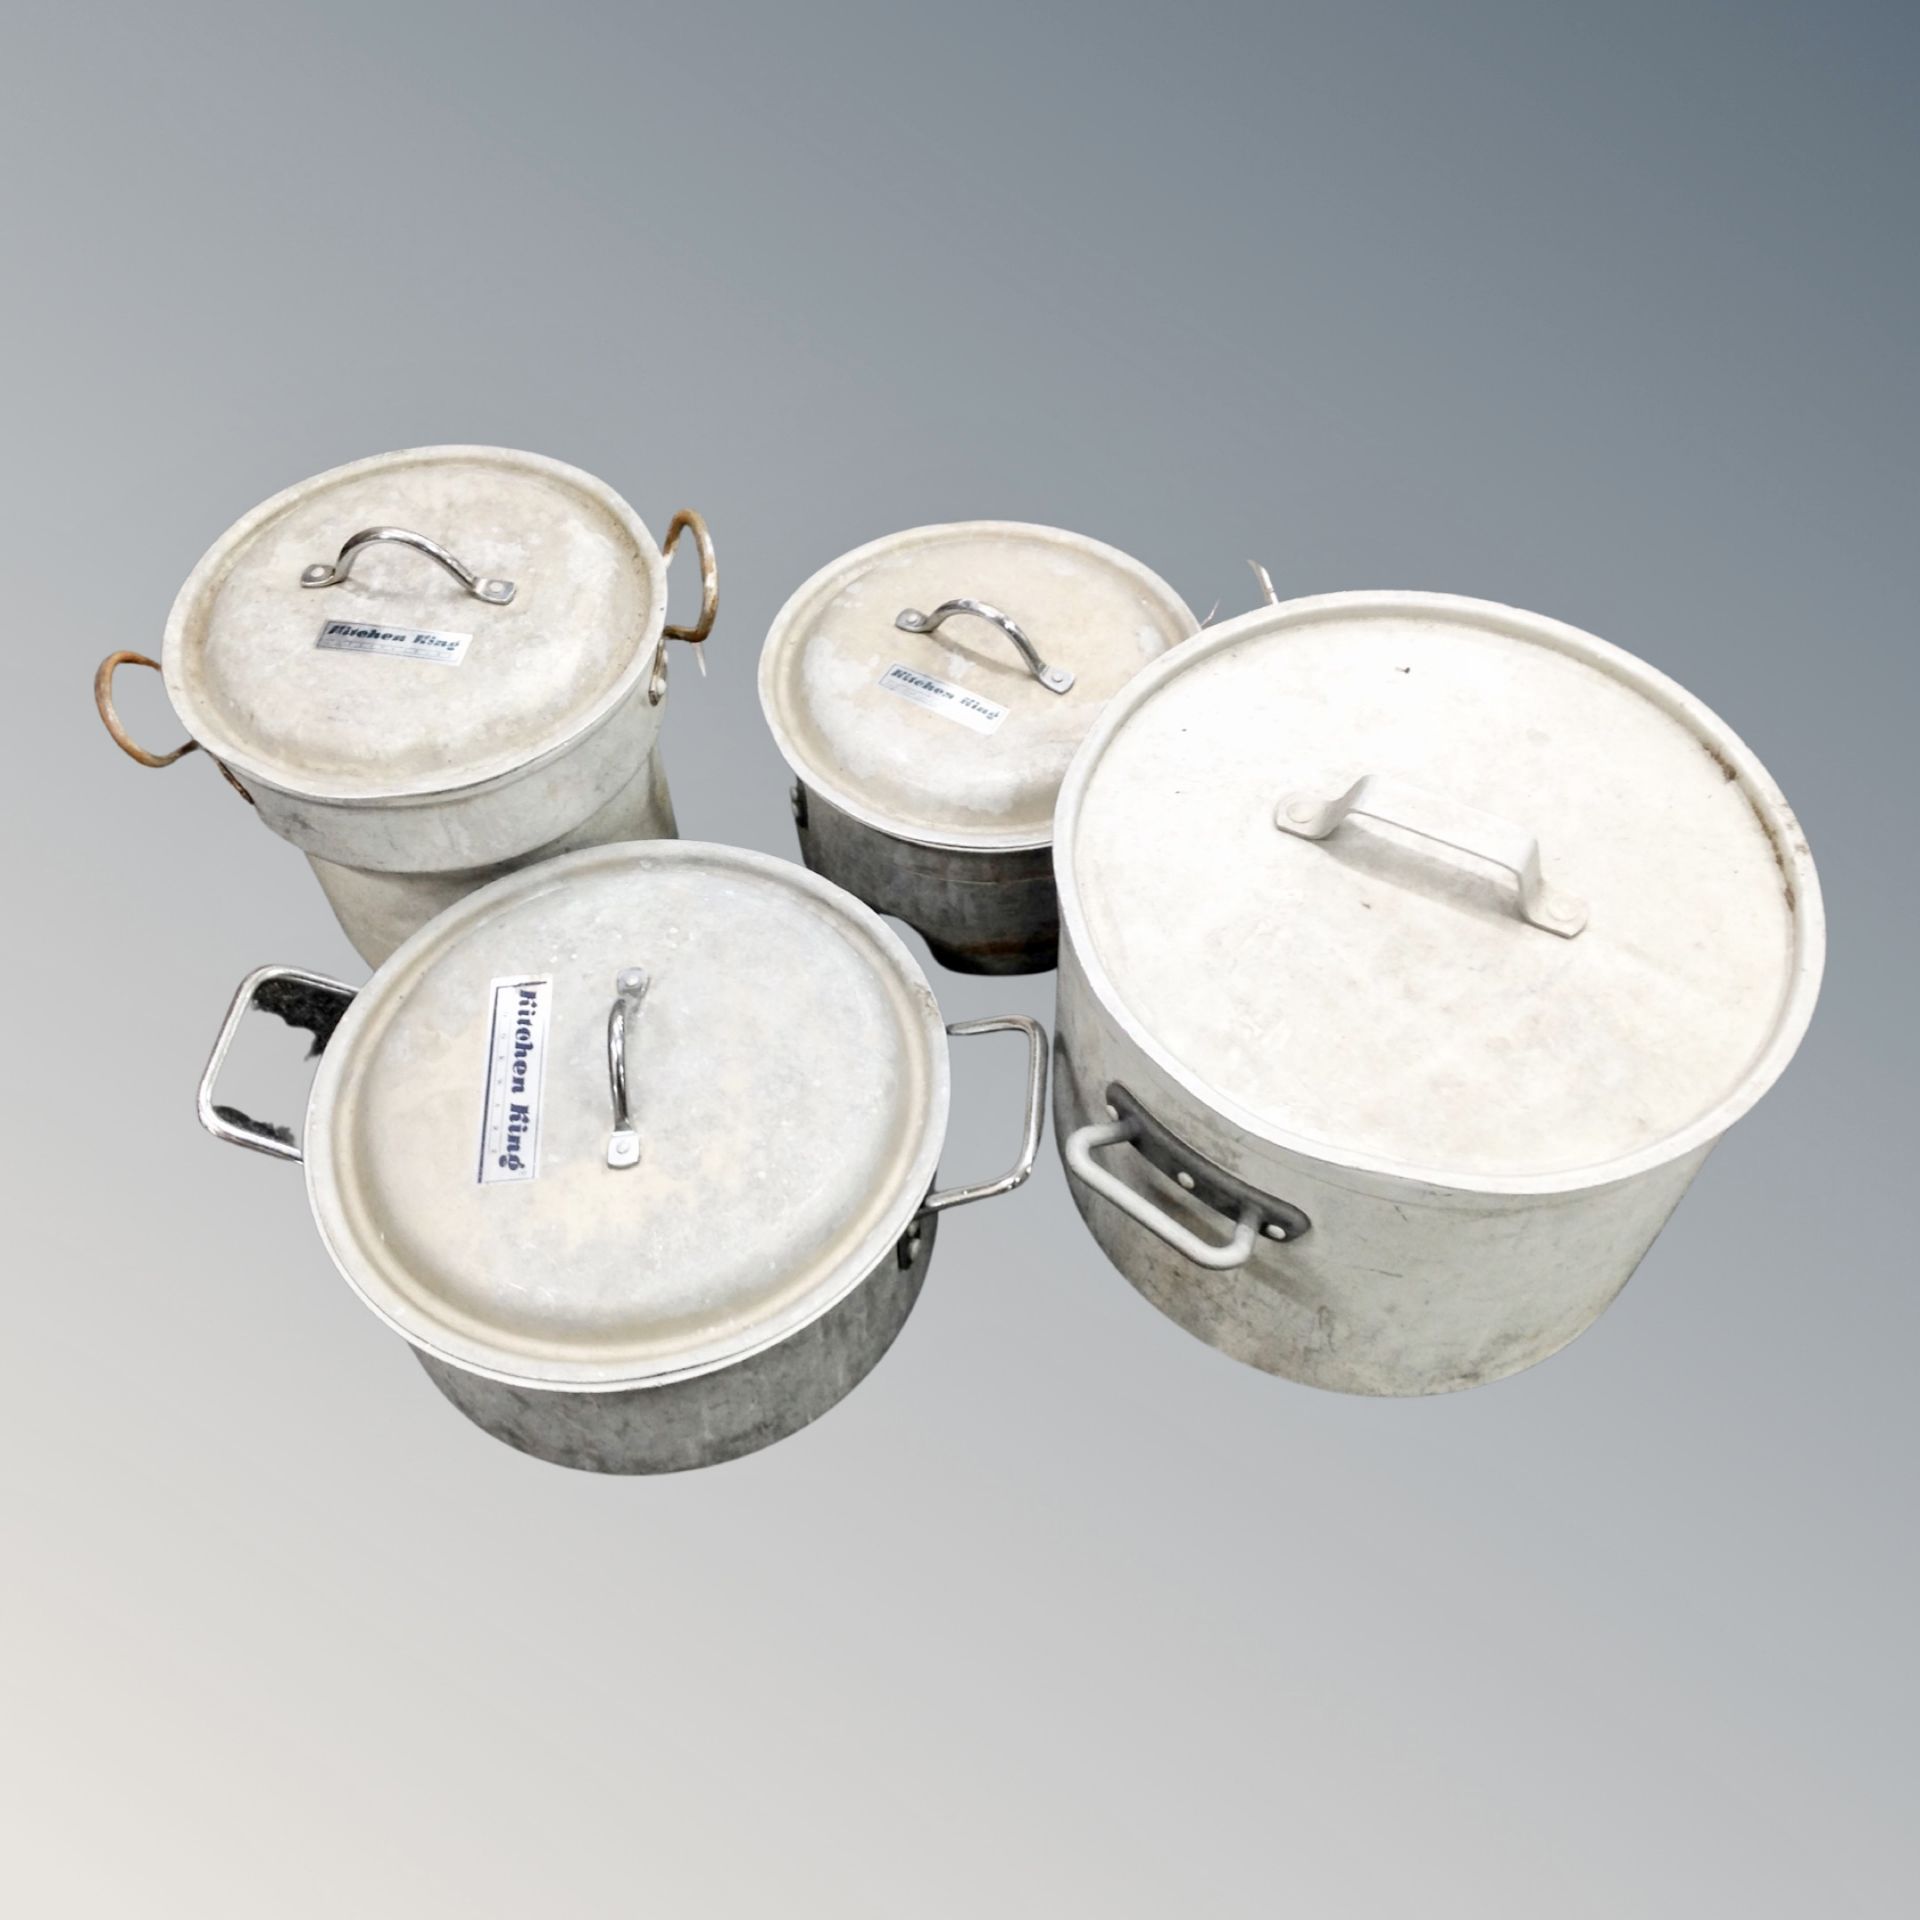 Four aluminium catering cooking pots with lids